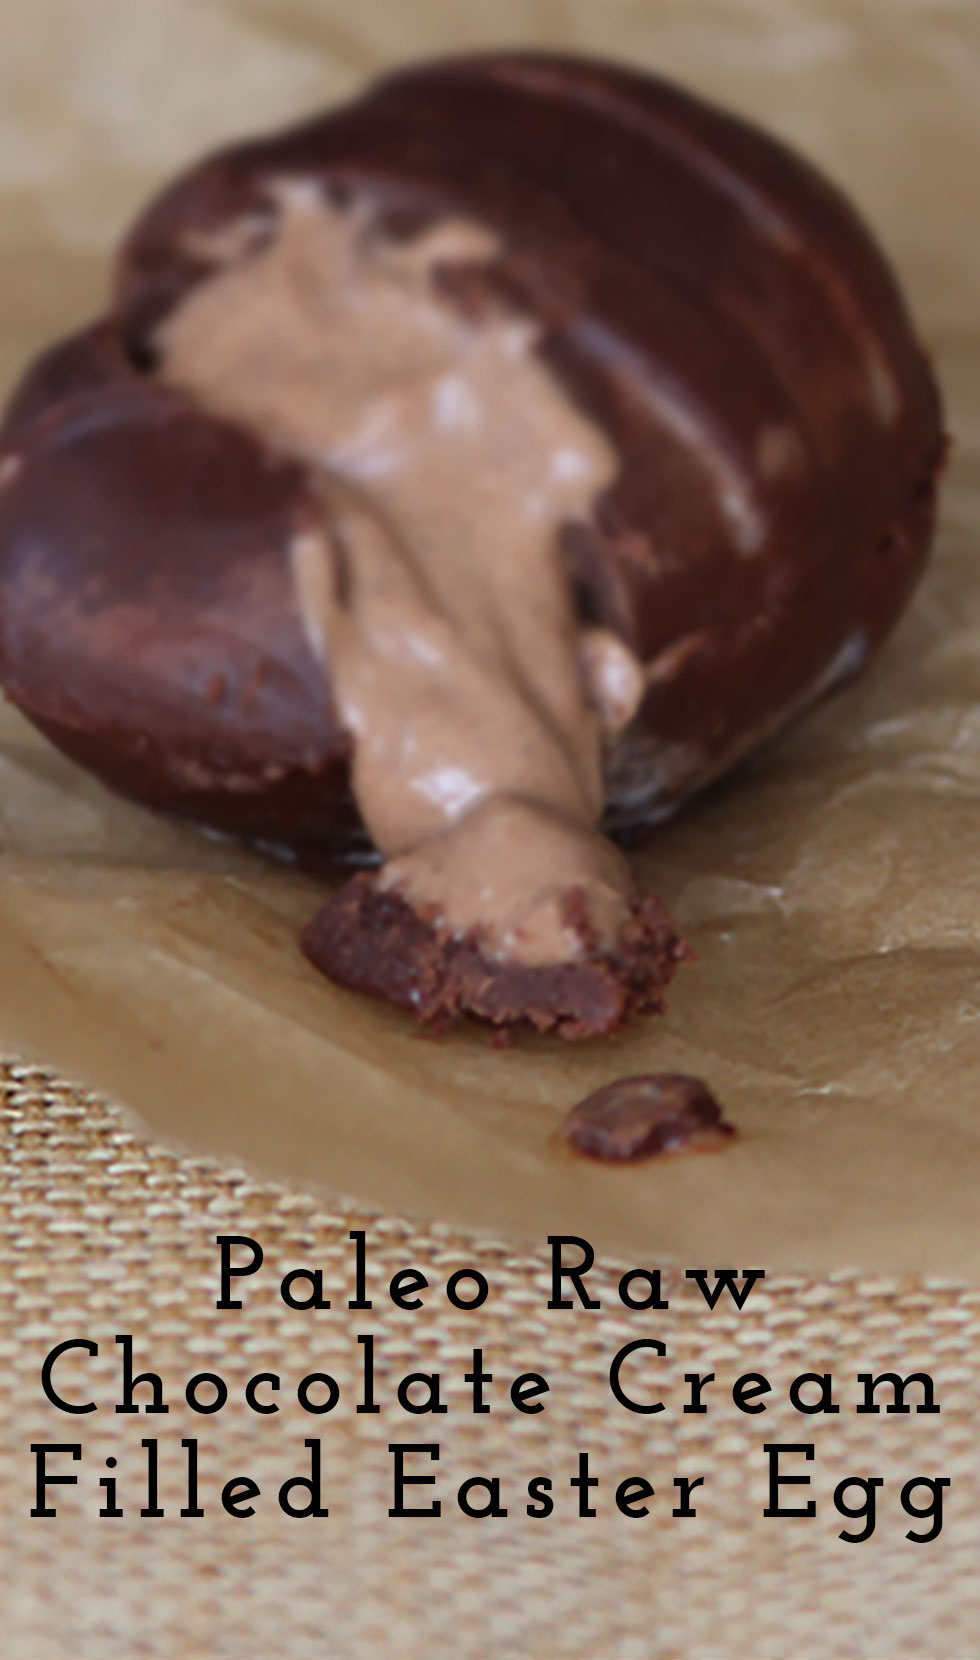 paleo-raw-chocolate-filled-easter-eggs